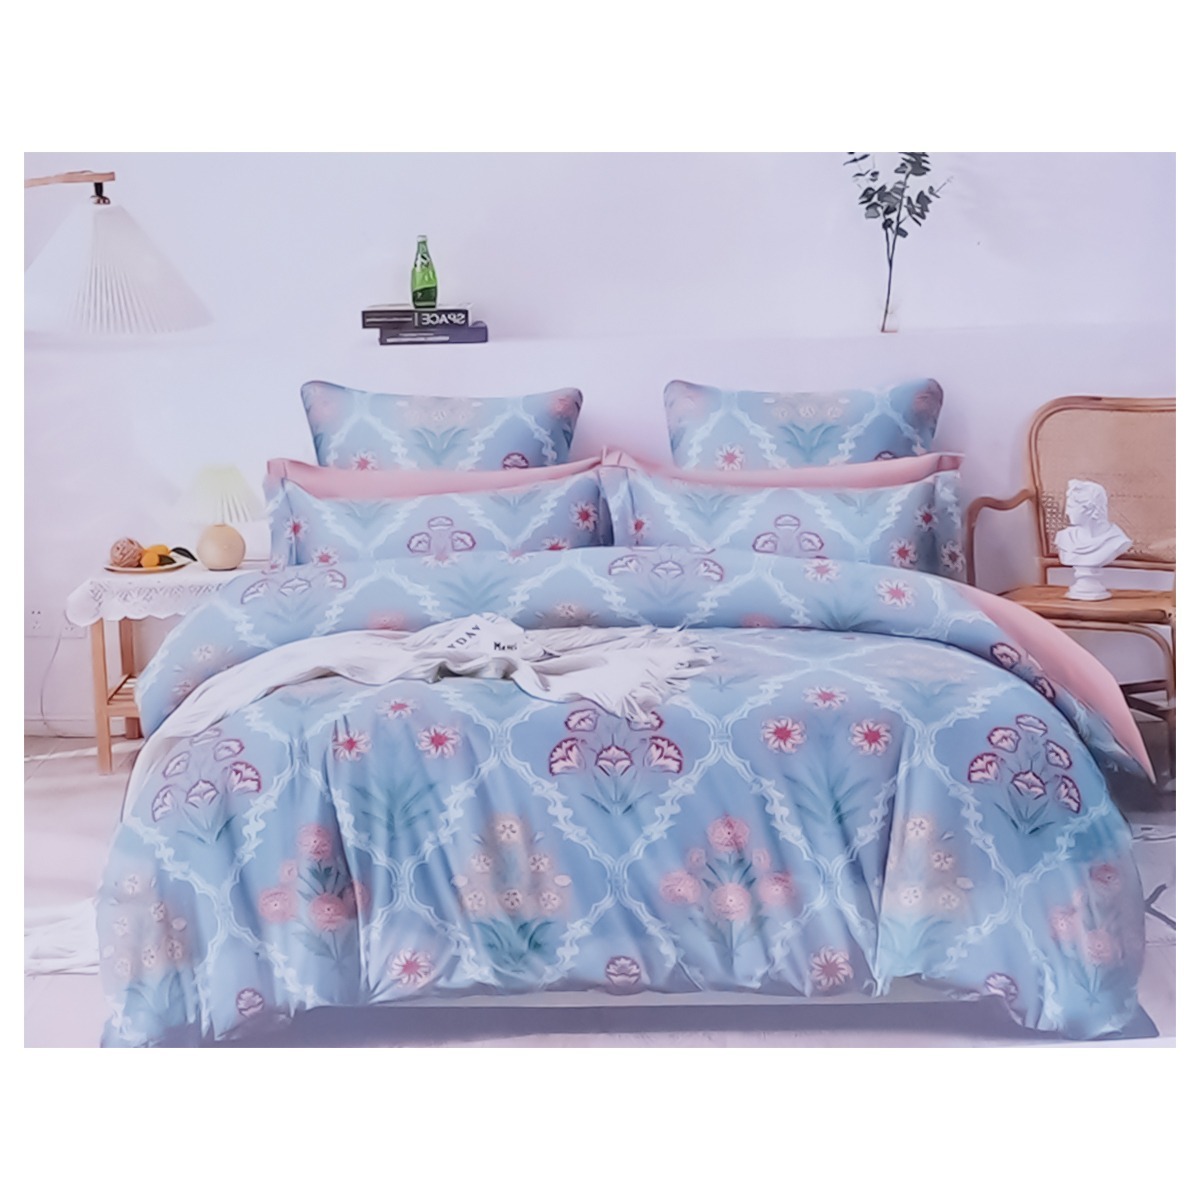 Home well Bed Sheet King size Iconic Bed Sheet Assorted Colour and Assorted Design | Set of 3